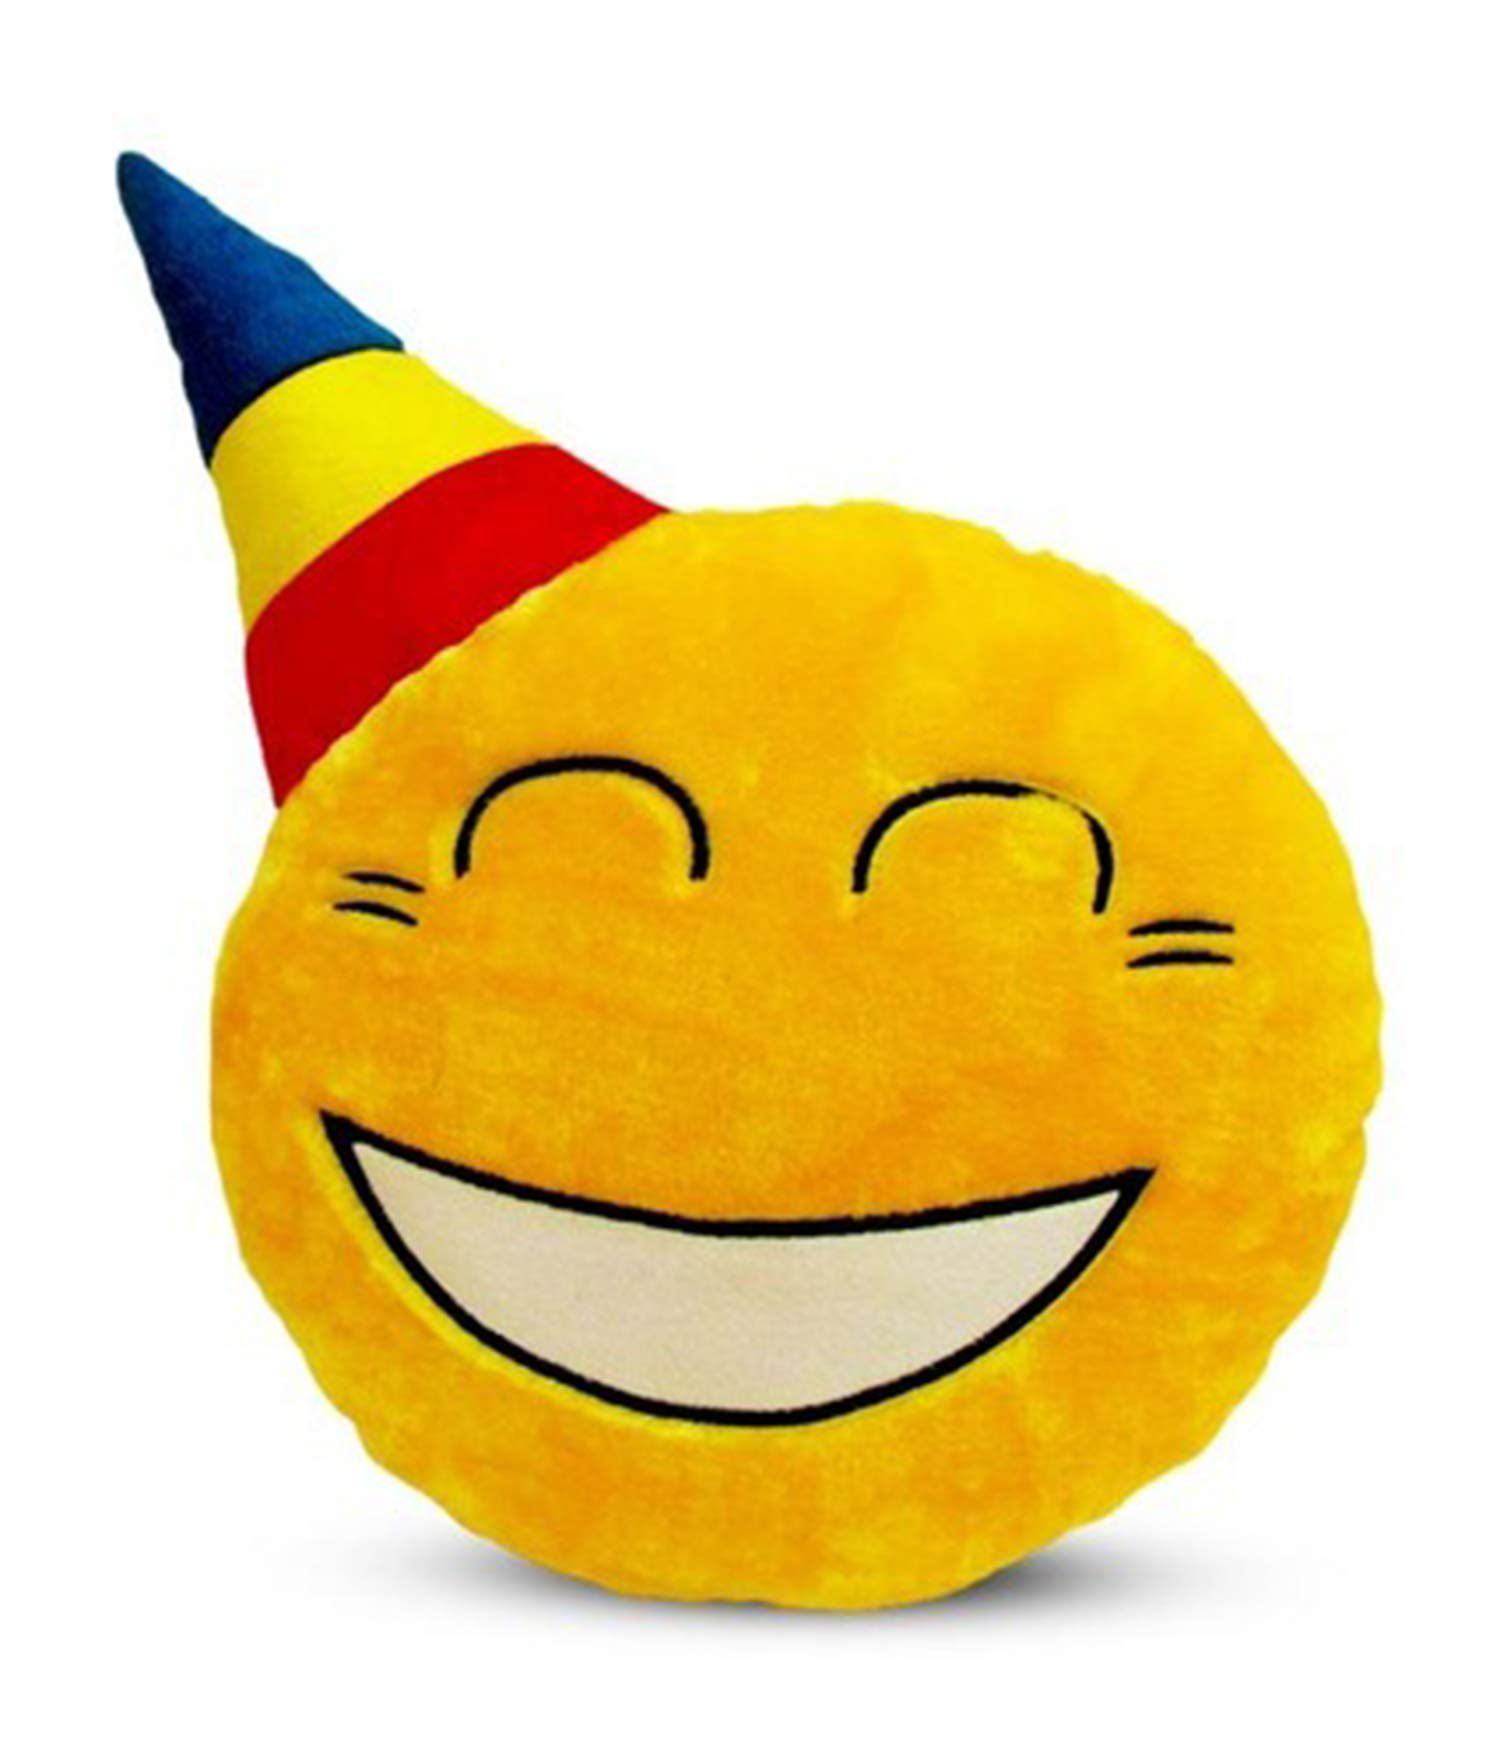     			Tickles Stuffed Soft Party Smiley Cushion Toy Pillow Car 33 cm (Made in India)